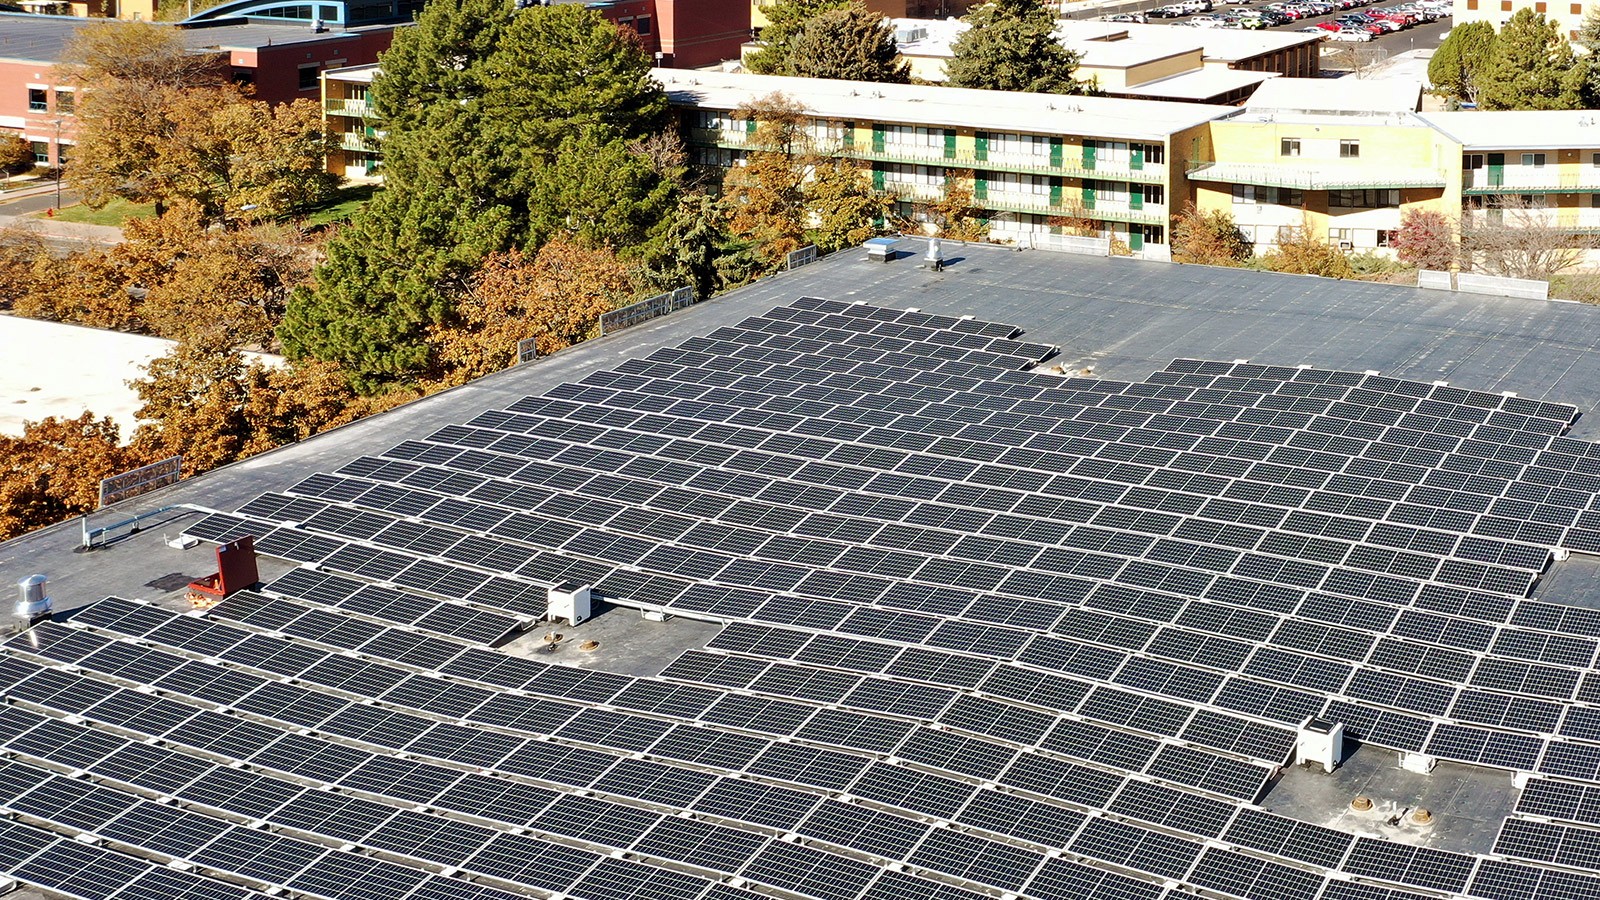 USU’s only rooftop top solar panels on Gateway Parking Terrace.